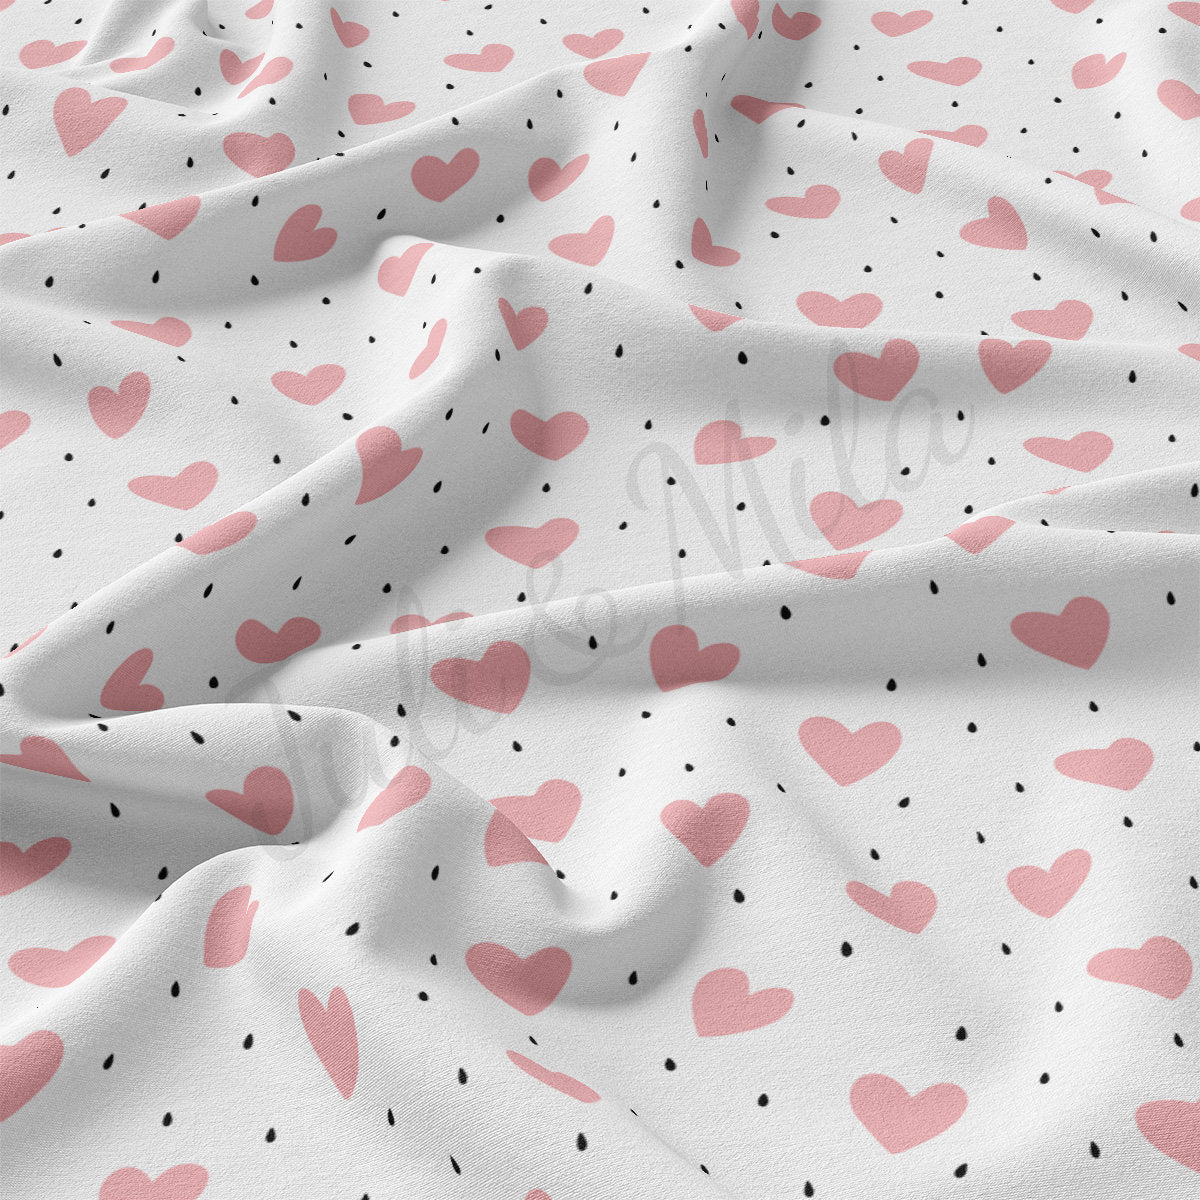 DBP Fabric Double Brushed Polyester DBP2478 Valentine's Day